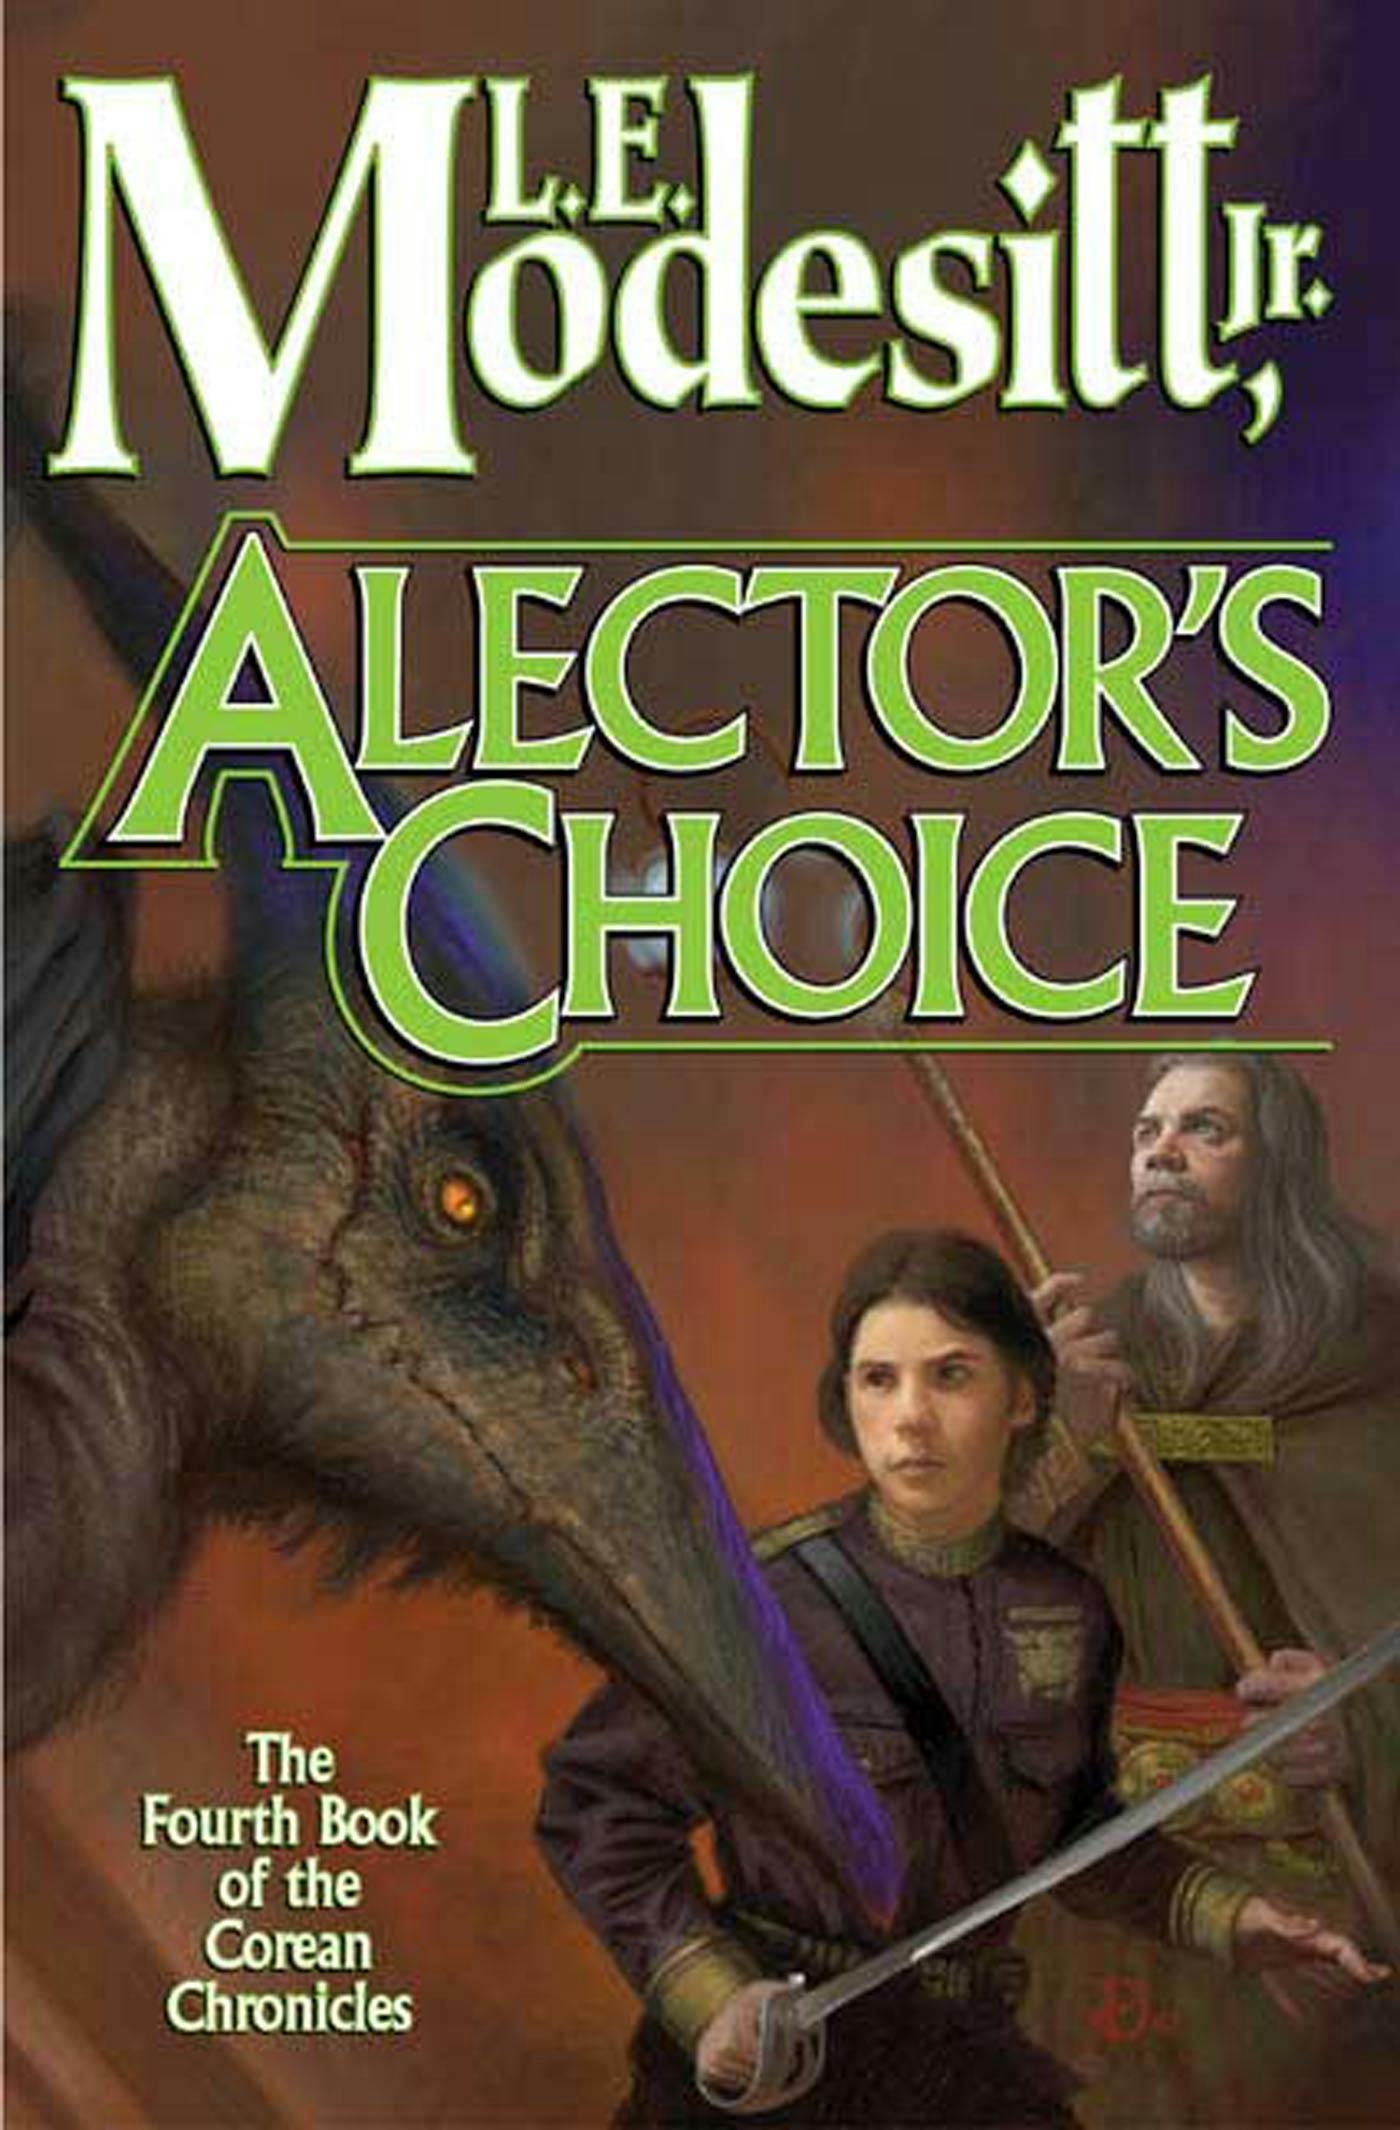 Cover for the book titled as: Alector's Choice